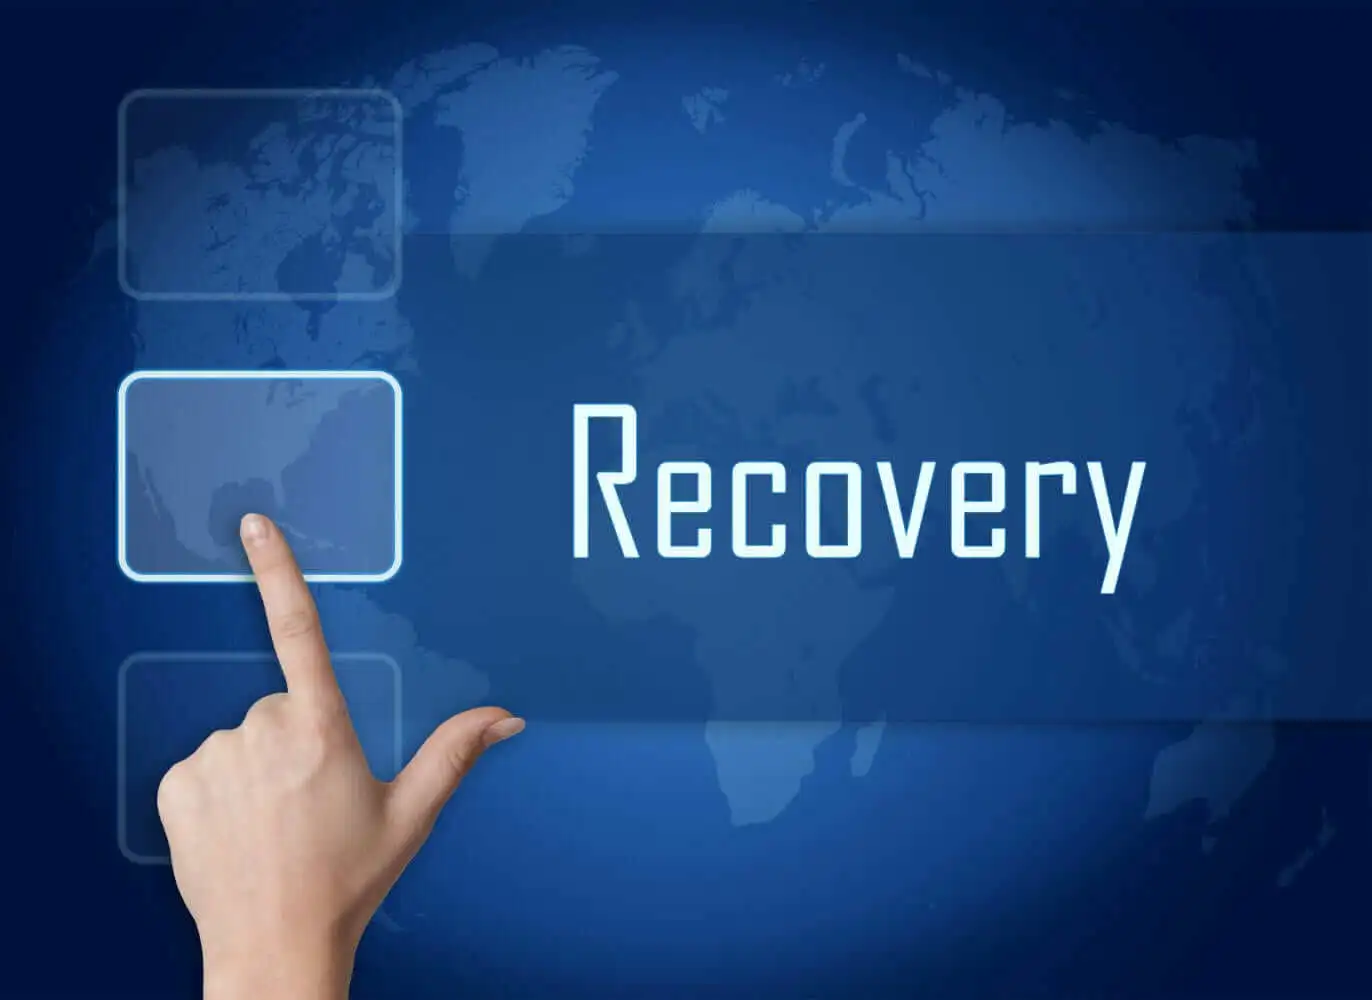 Building a Disaster Recovery Plan